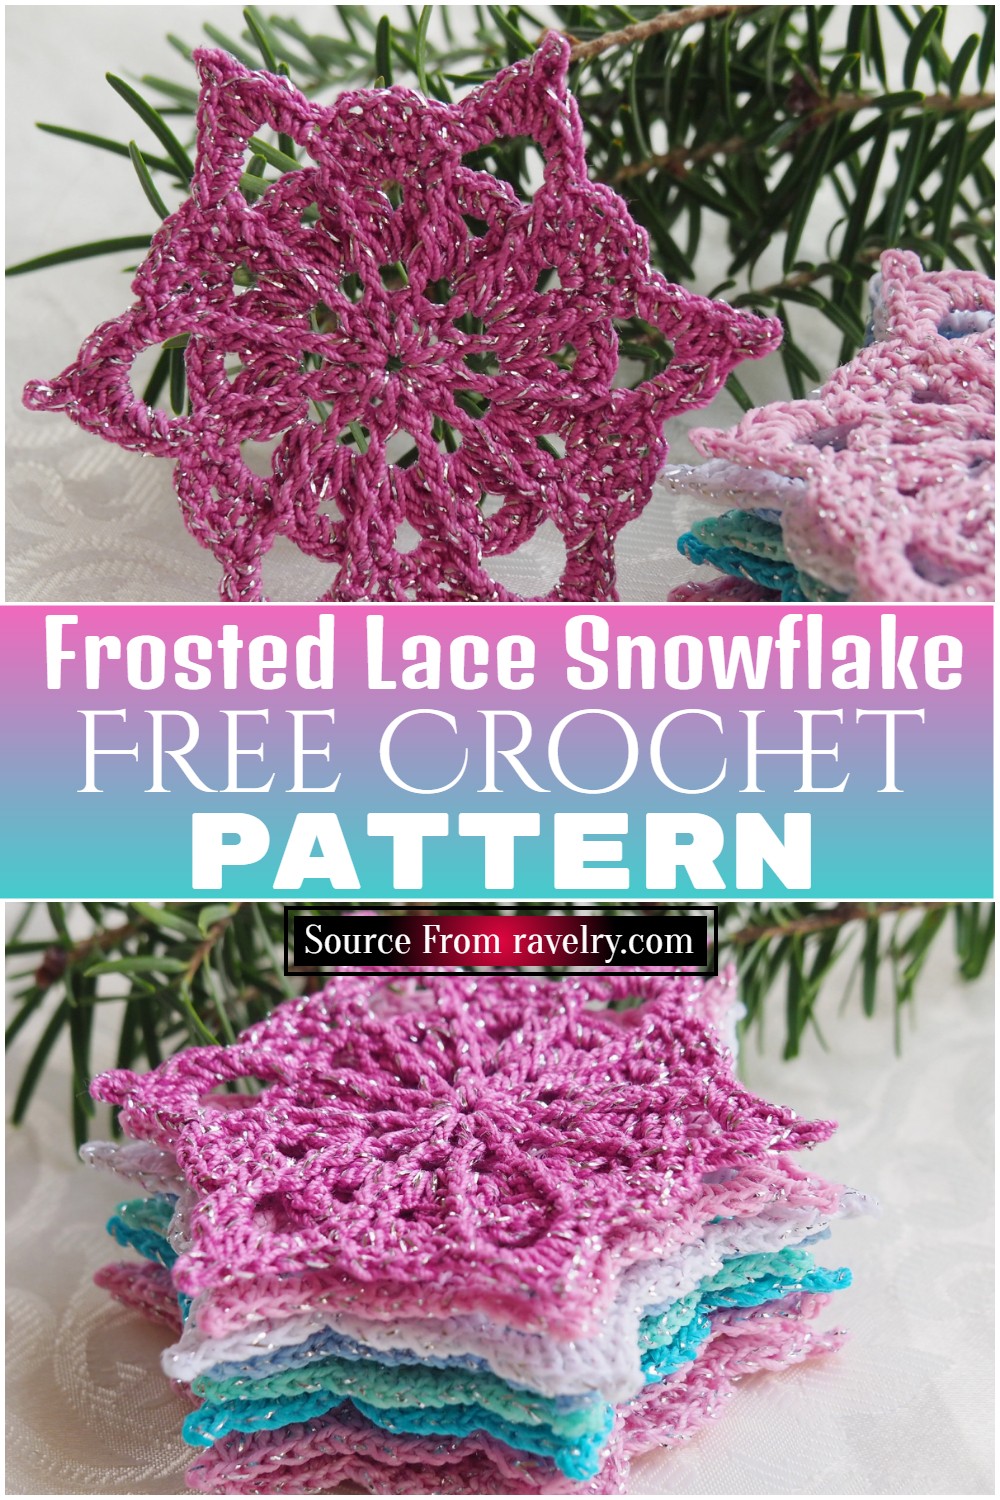 Free Crochet Frosted Lace Snowflake ​pattern